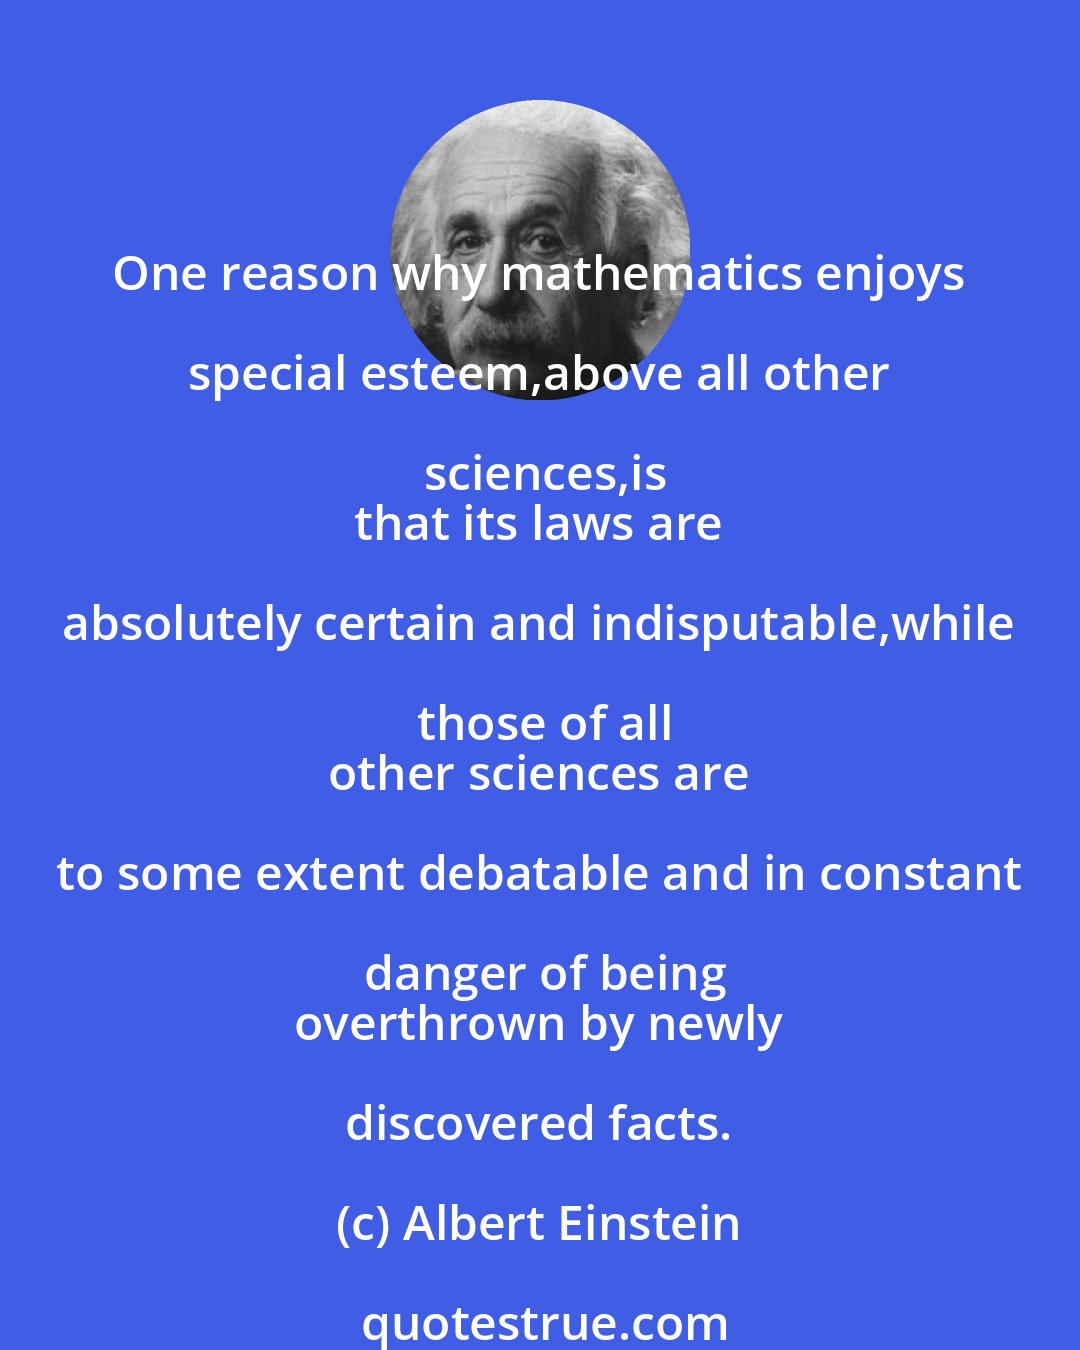 Albert Einstein: One reason why mathematics enjoys special esteem,above all other sciences,is
 that its laws are absolutely certain and indisputable,while those of all
 other sciences are to some extent debatable and in constant danger of being
 overthrown by newly discovered facts.